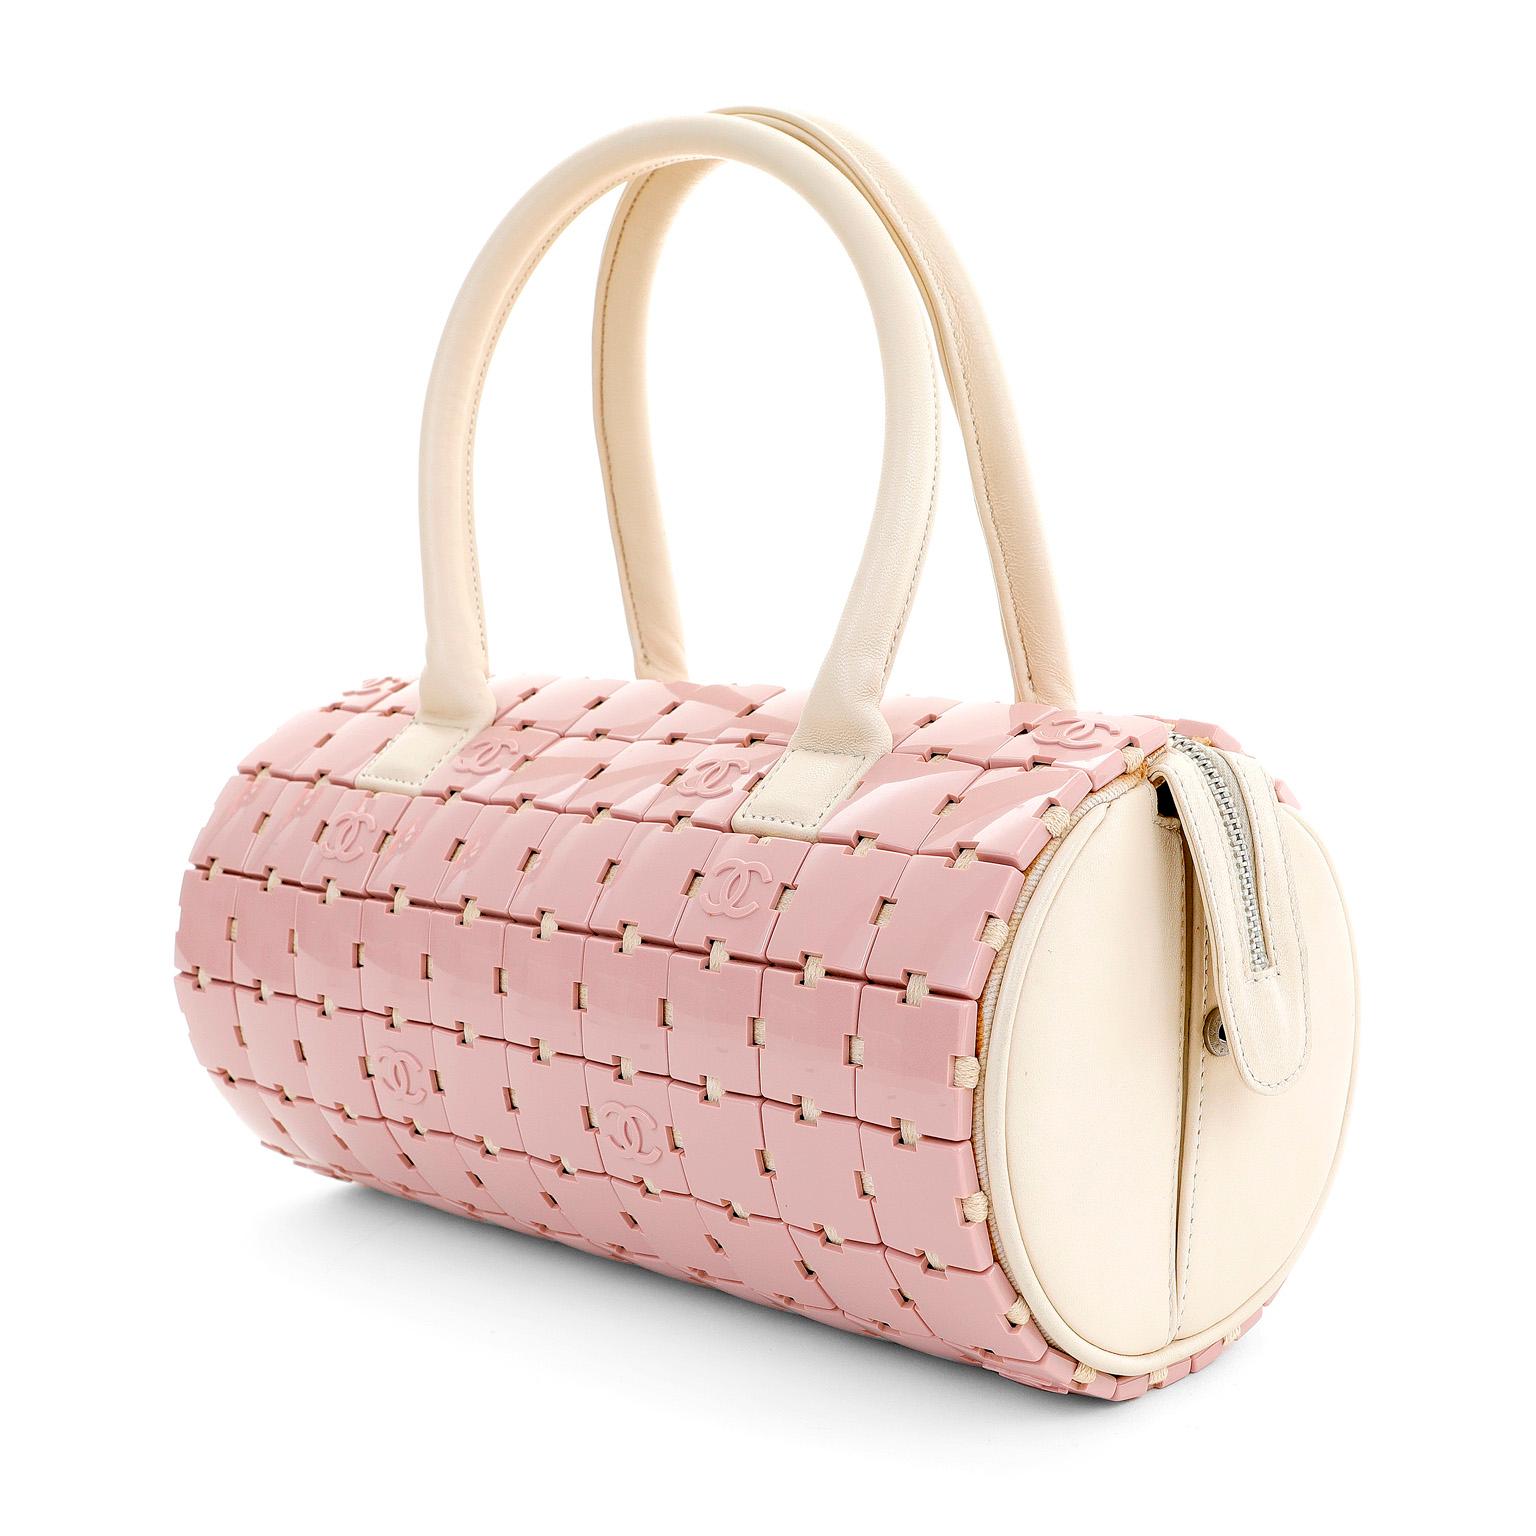 Chanel Pink Lucite Puzzle Mini Barrel Bag In Good Condition For Sale In Palm Beach, FL